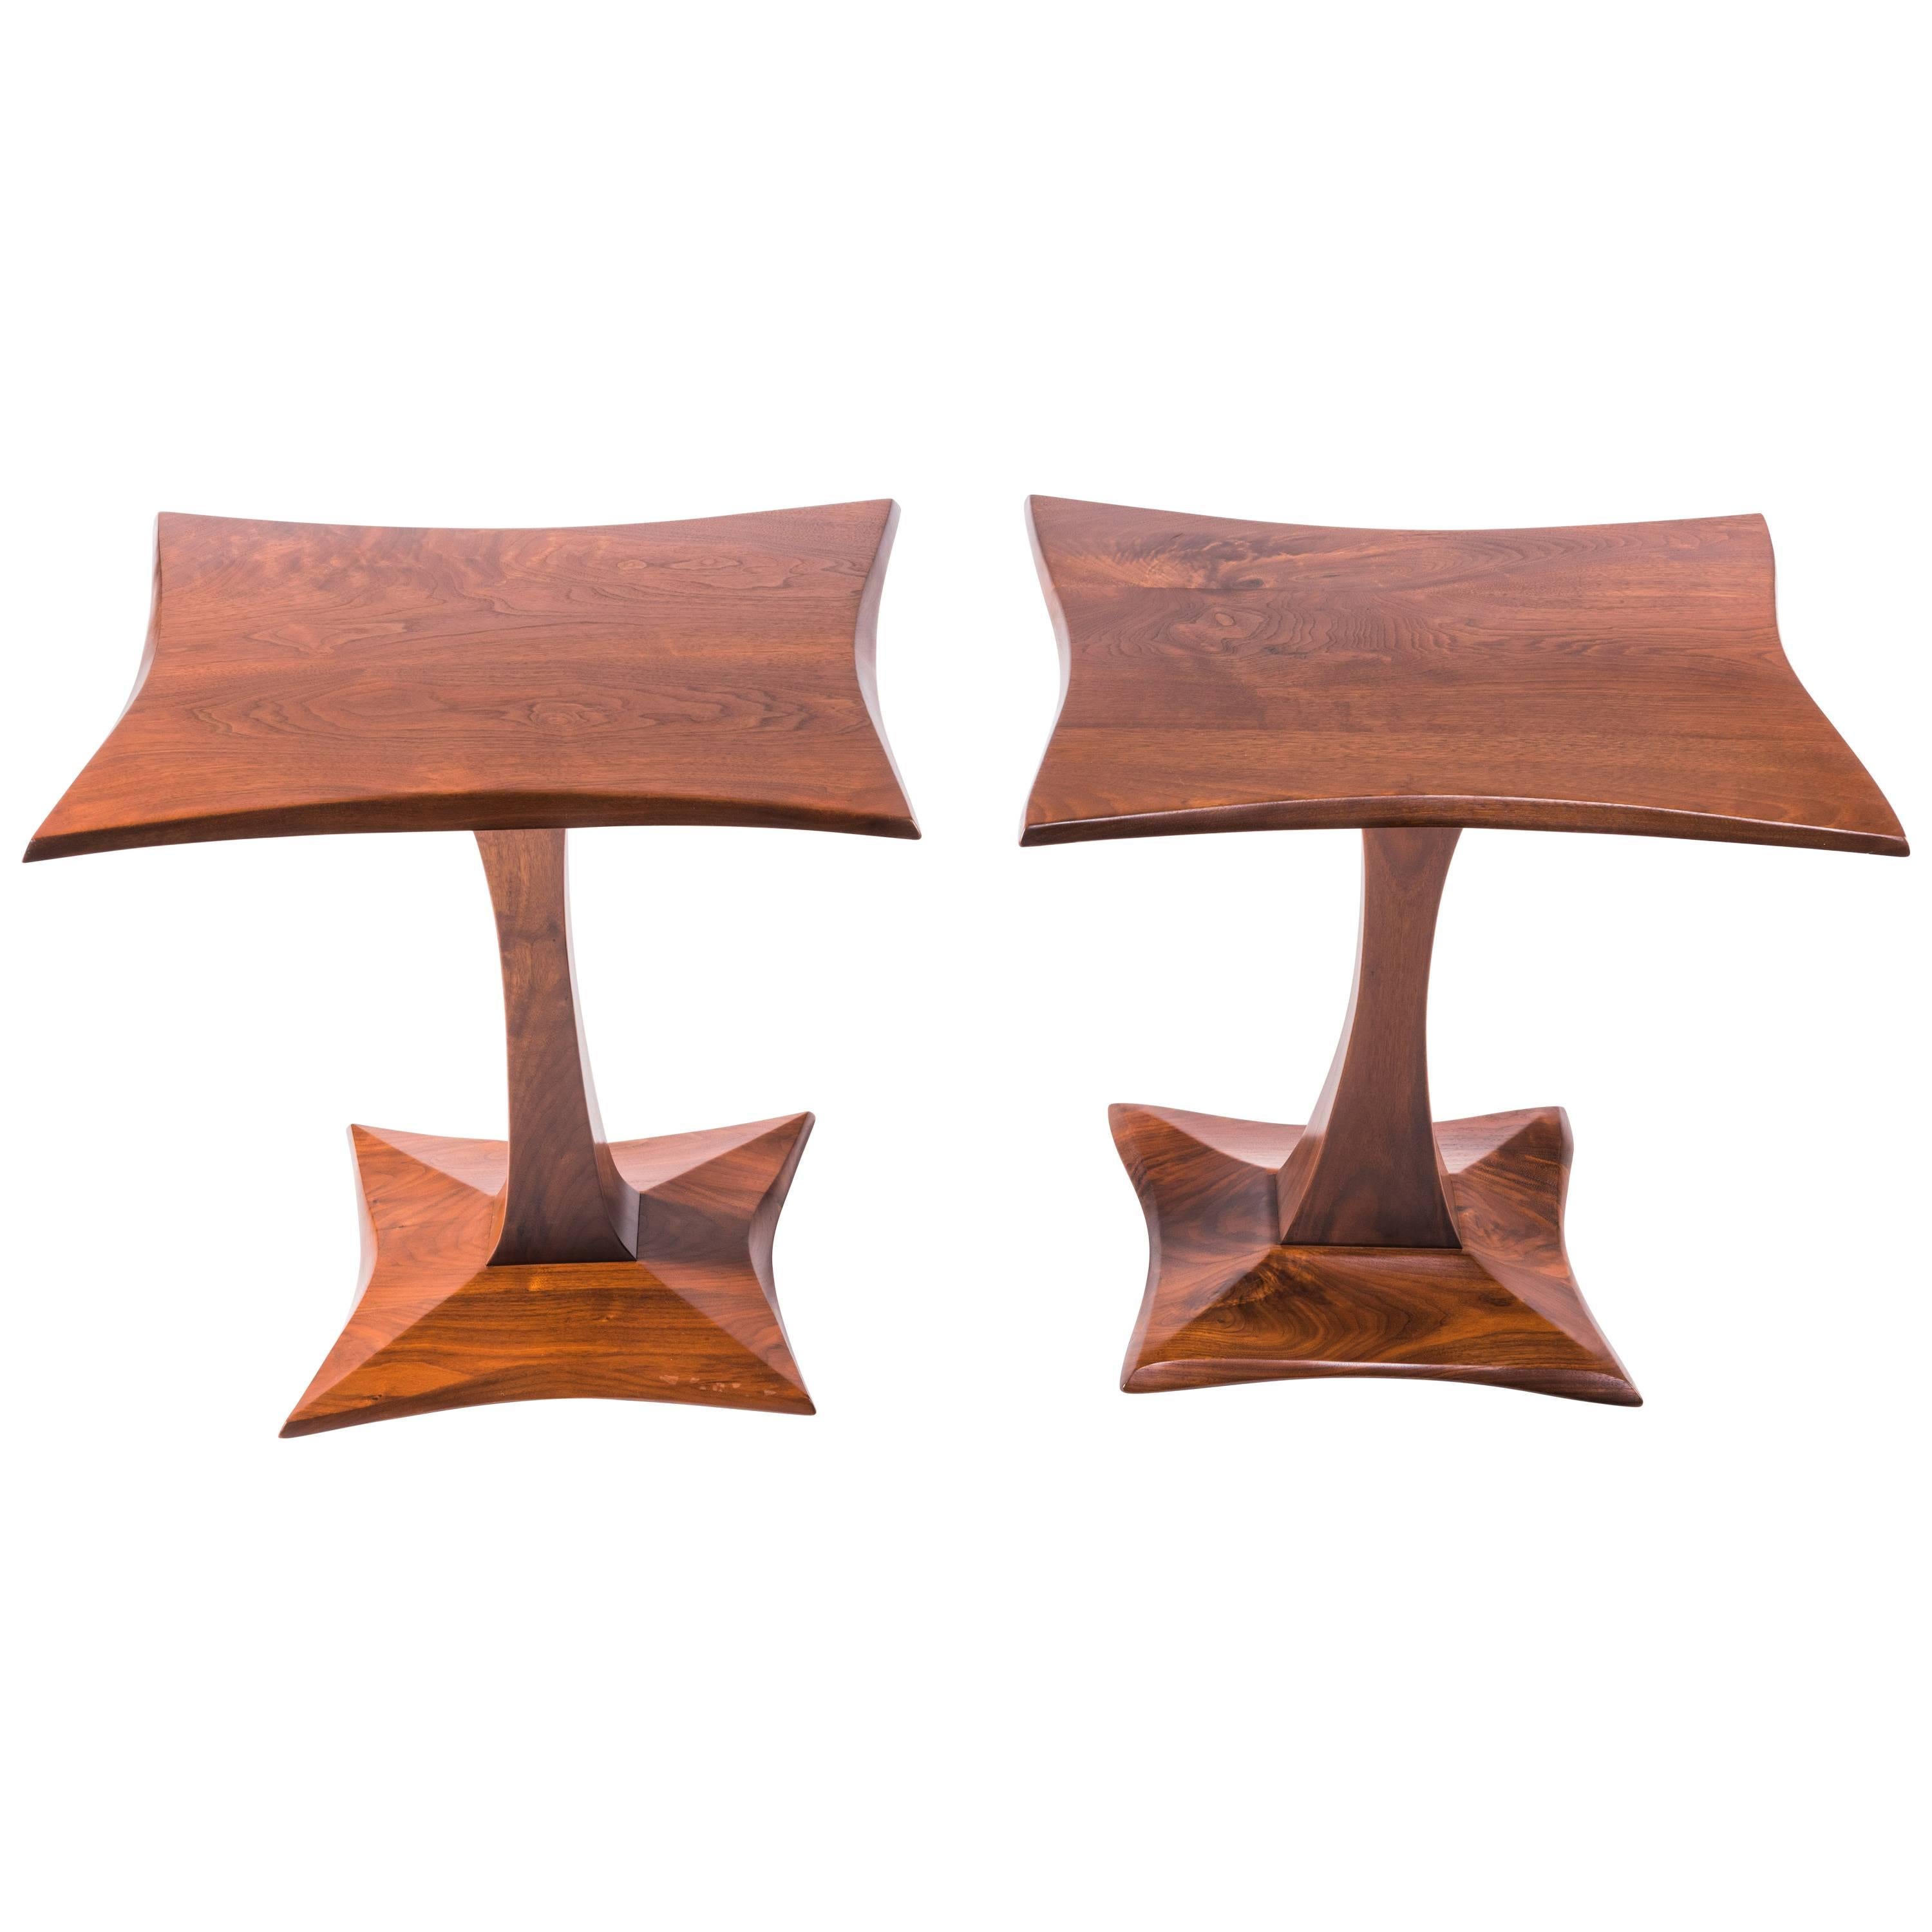 Pair of Side Tables by Robert Whitley